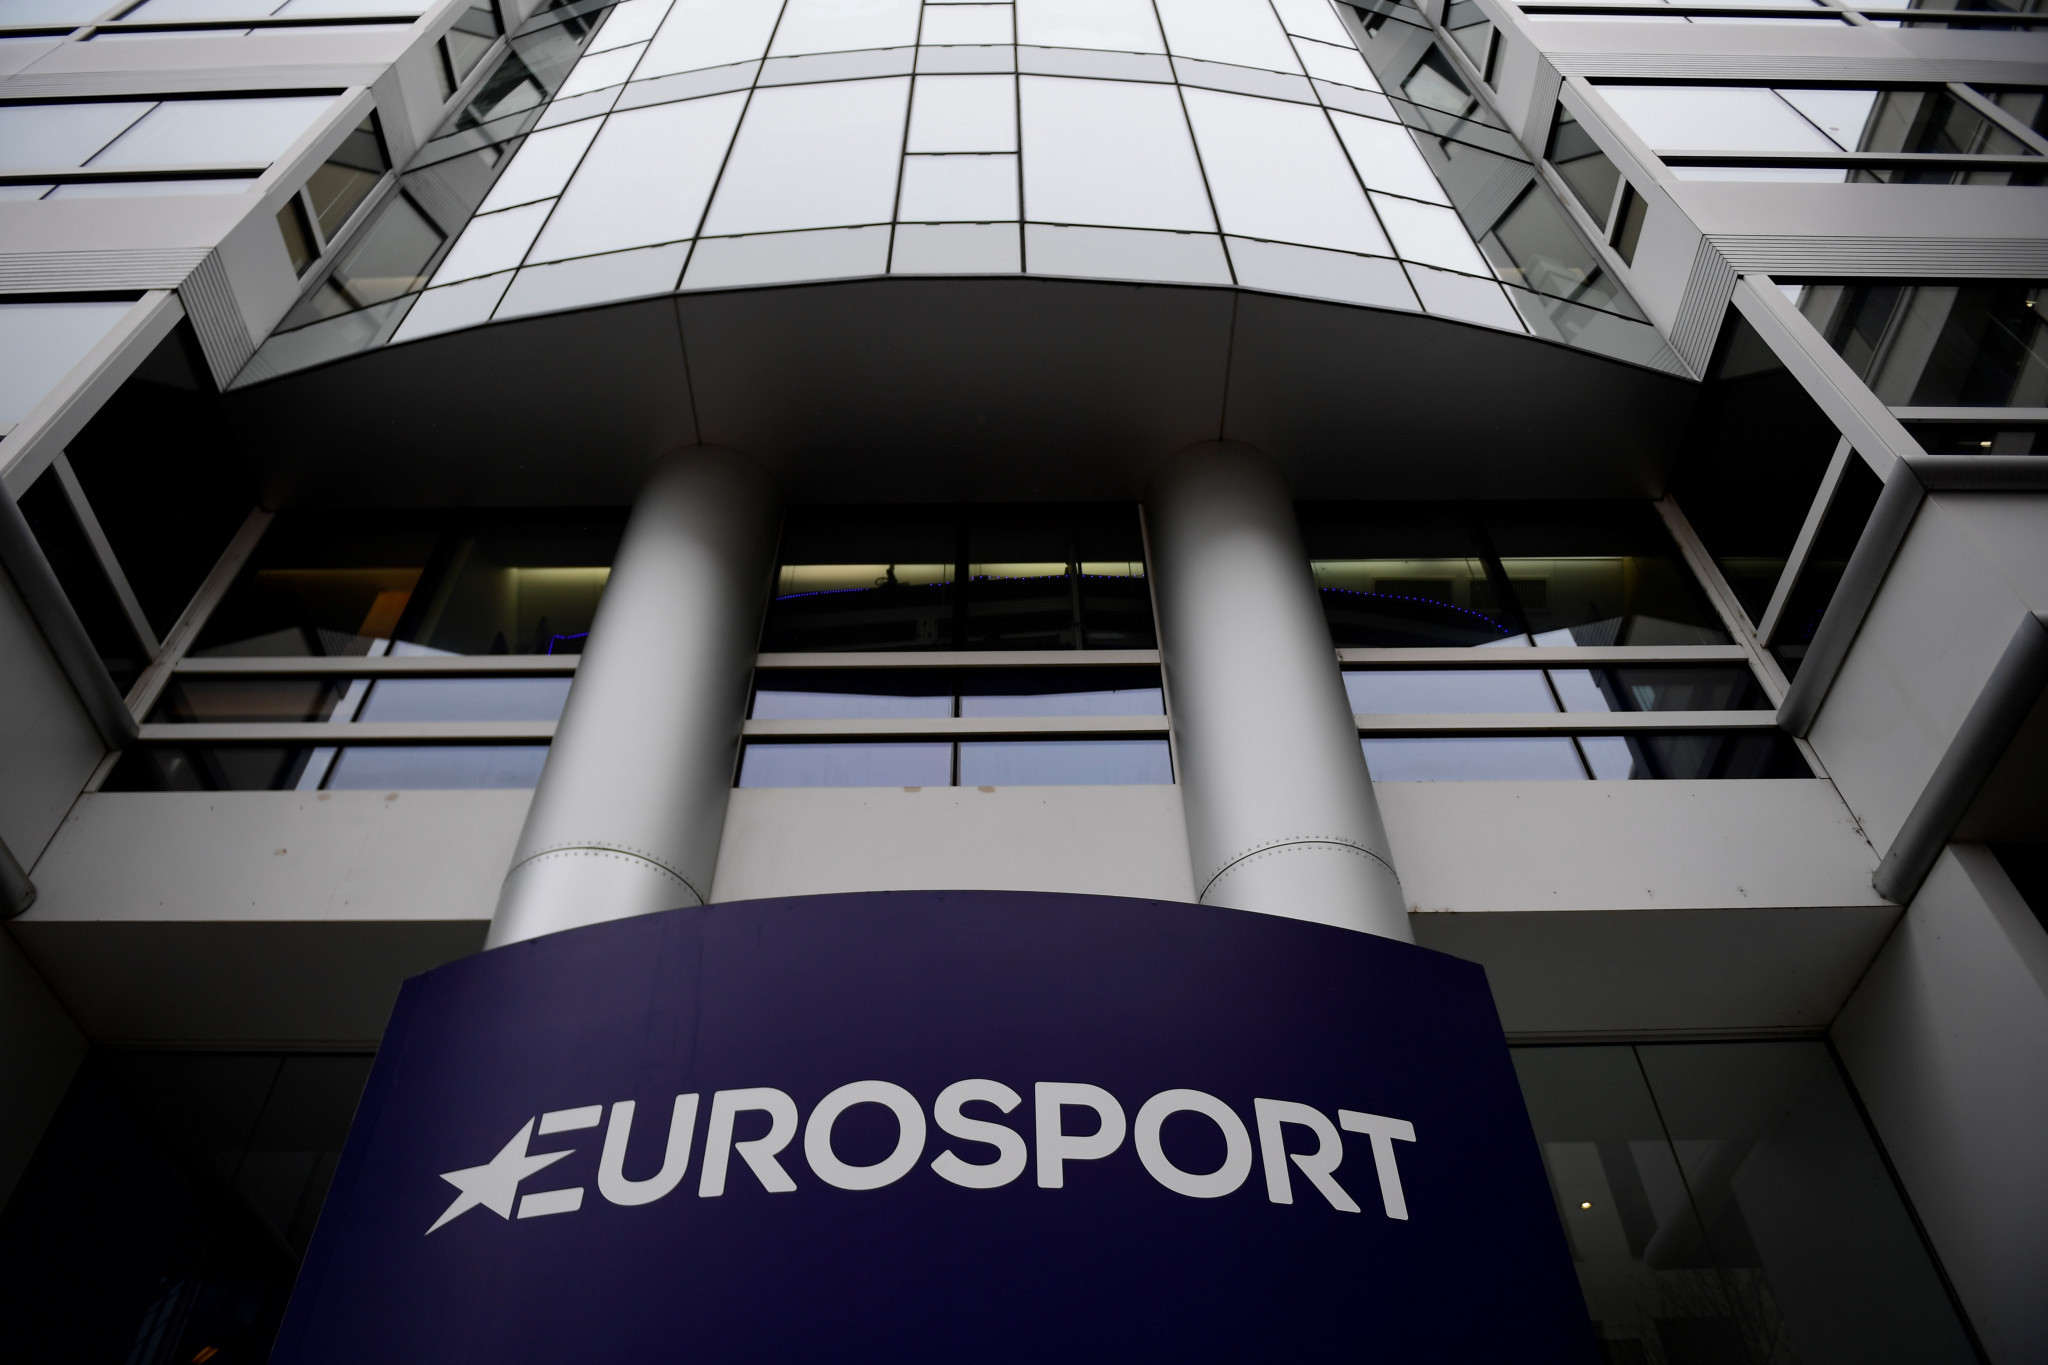 Eurosport is one of the main channels under the Warner Bros. Discovery umbrella ©Getty Images